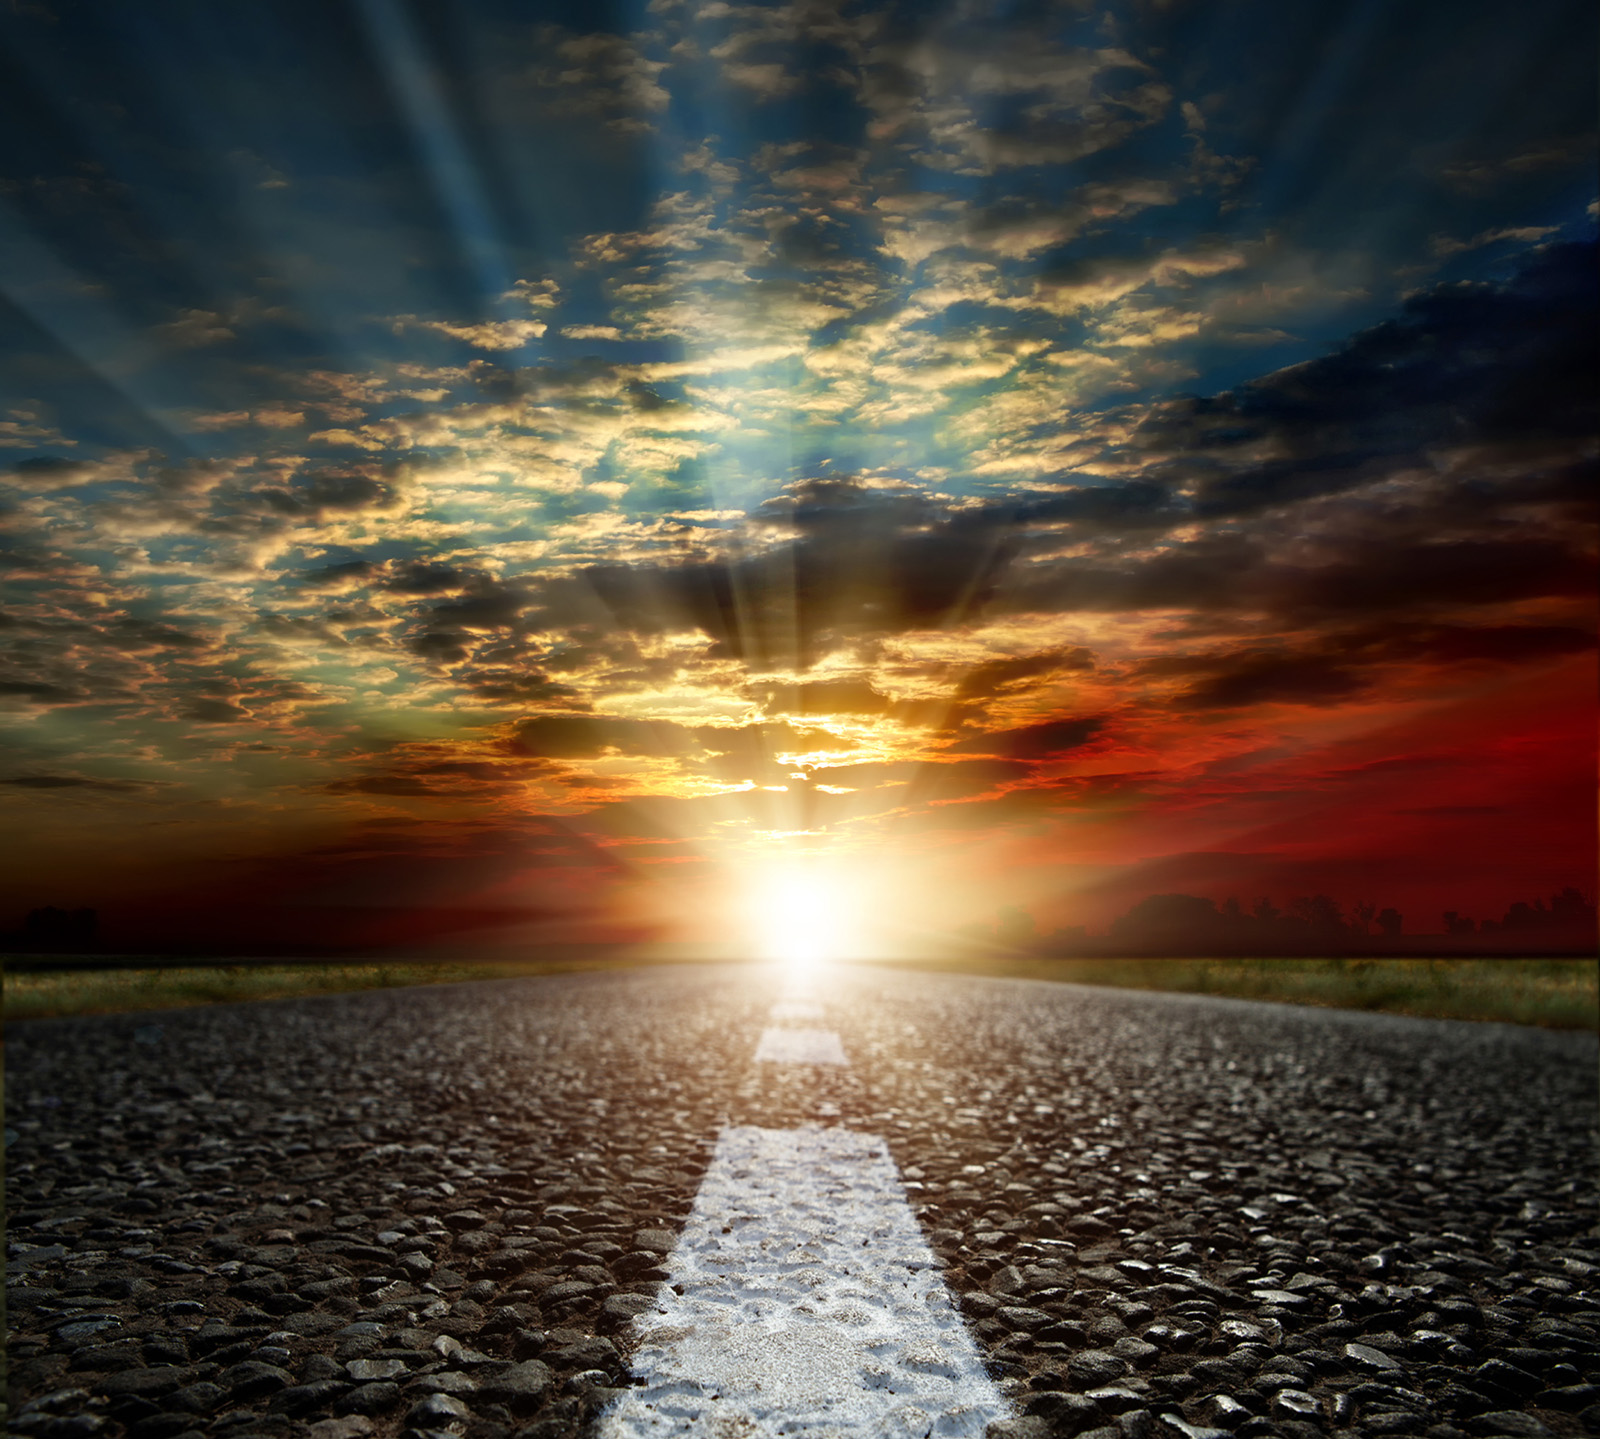 Bright sunlight and road surface 51048 - Roads photo - Landscape scenery